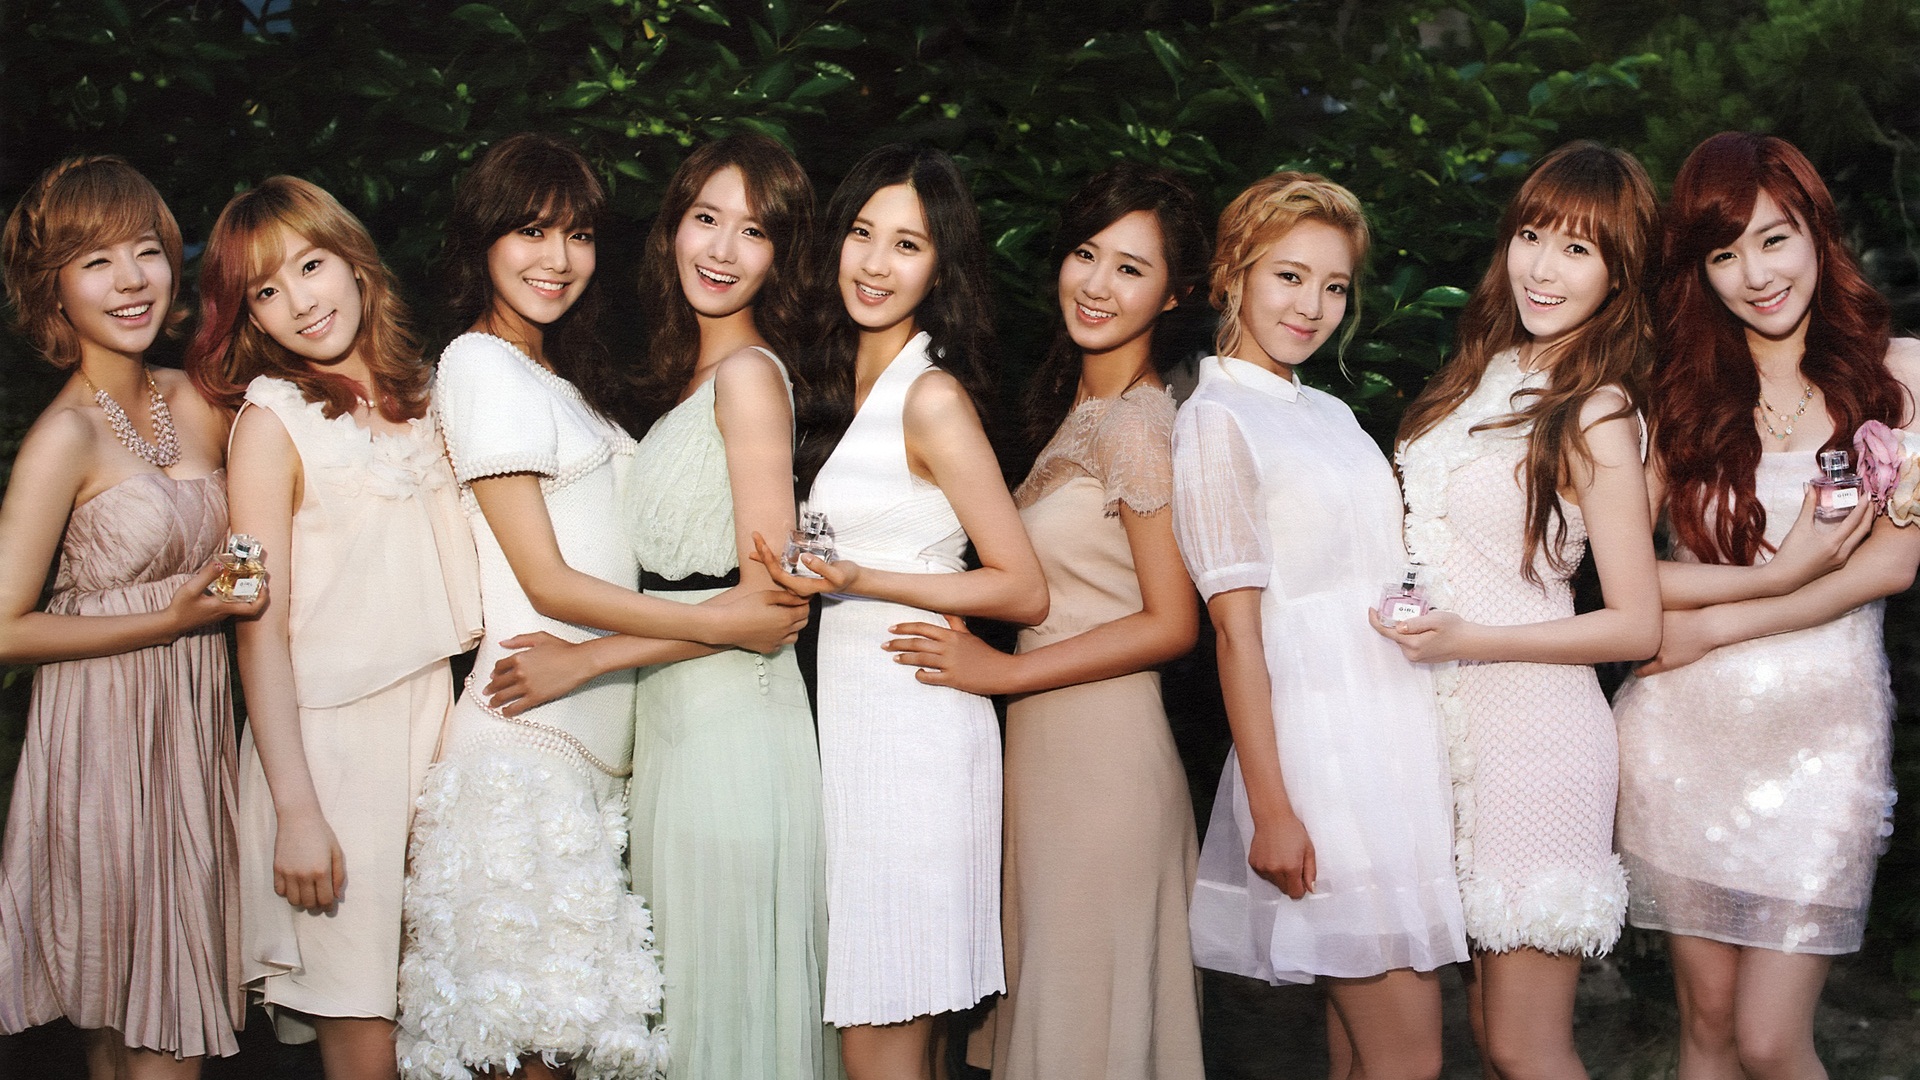 Girls Generation latest HD wallpapers collection #2 - 1920x1080